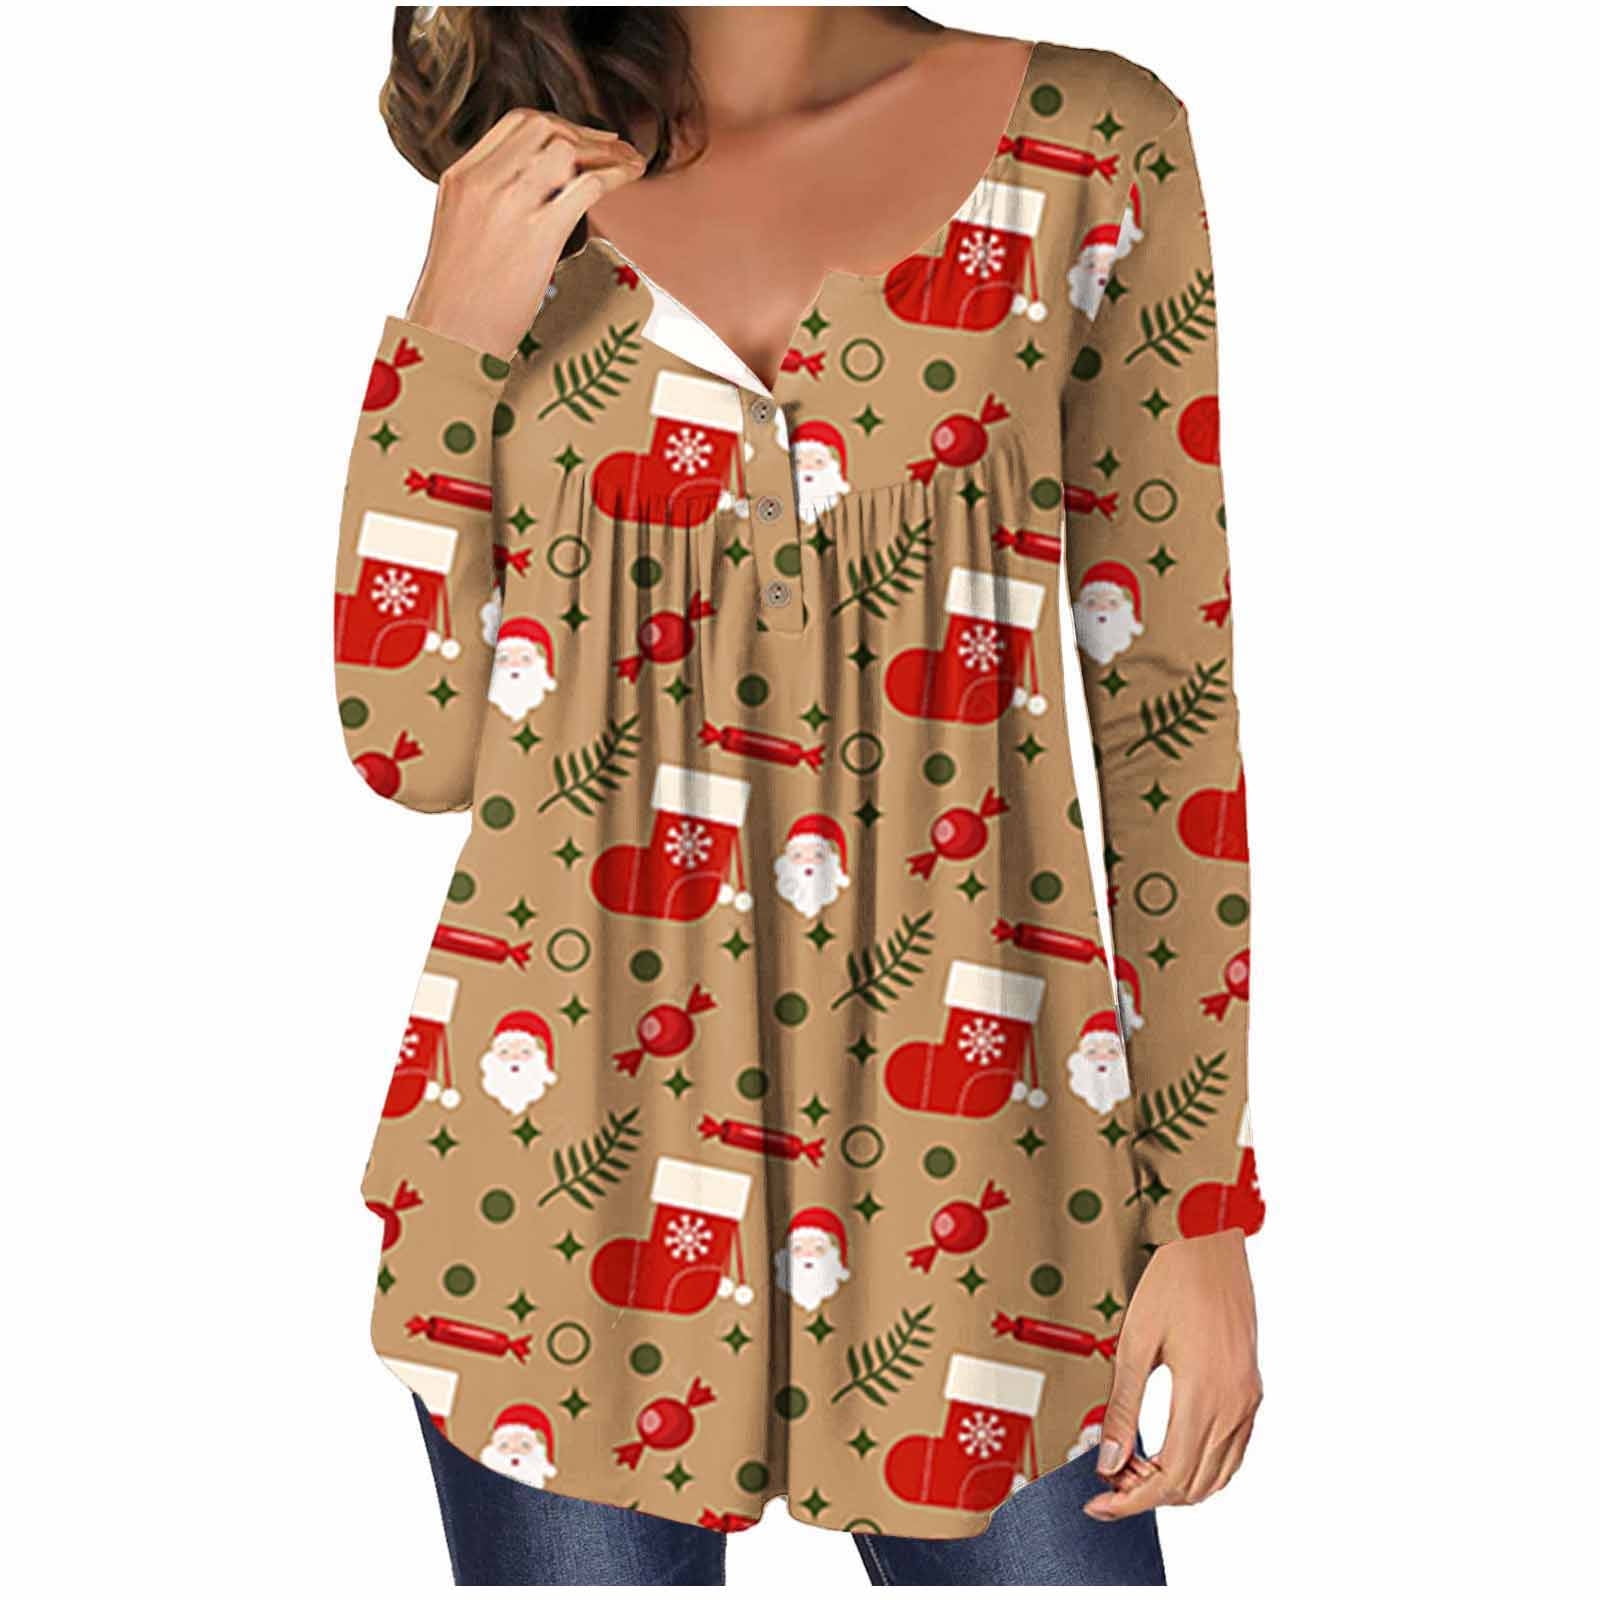 Yyeselk Women's Pleated Funny Christmas Pattern Long Sleeve Henley Shirts Buttons Bluse Tops - Walmart.com